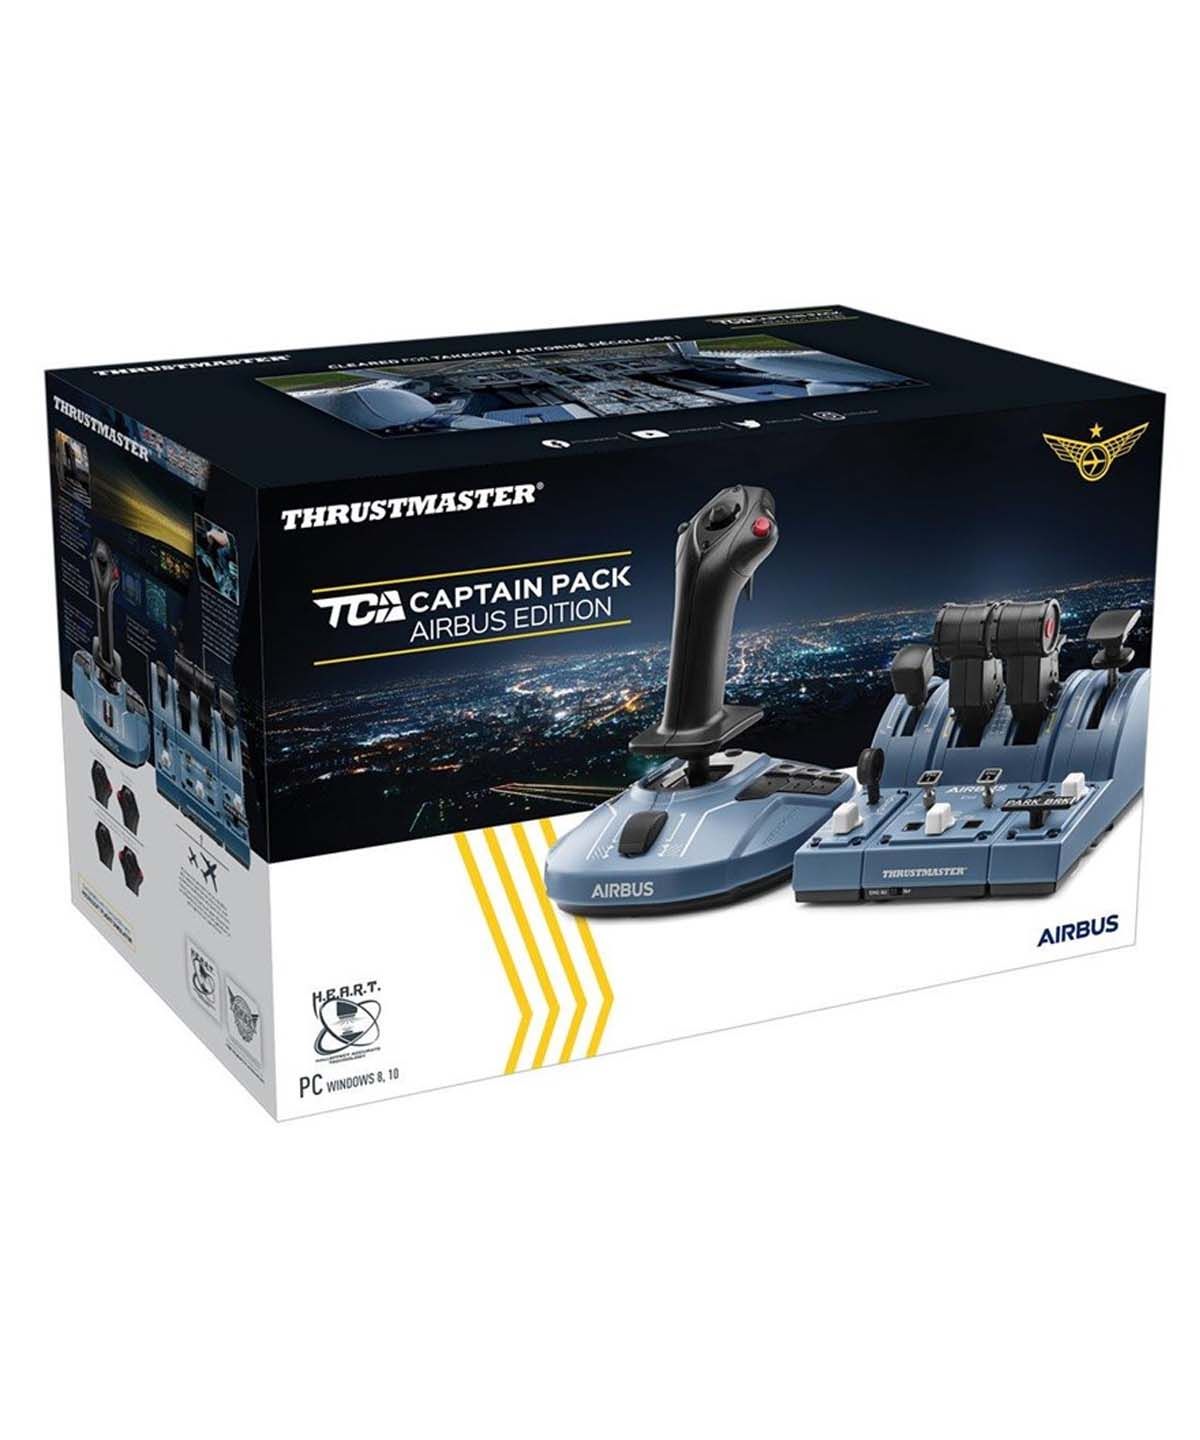 Cần Lái Thrustmaster Tca Captain Pack Airbus Edition 10